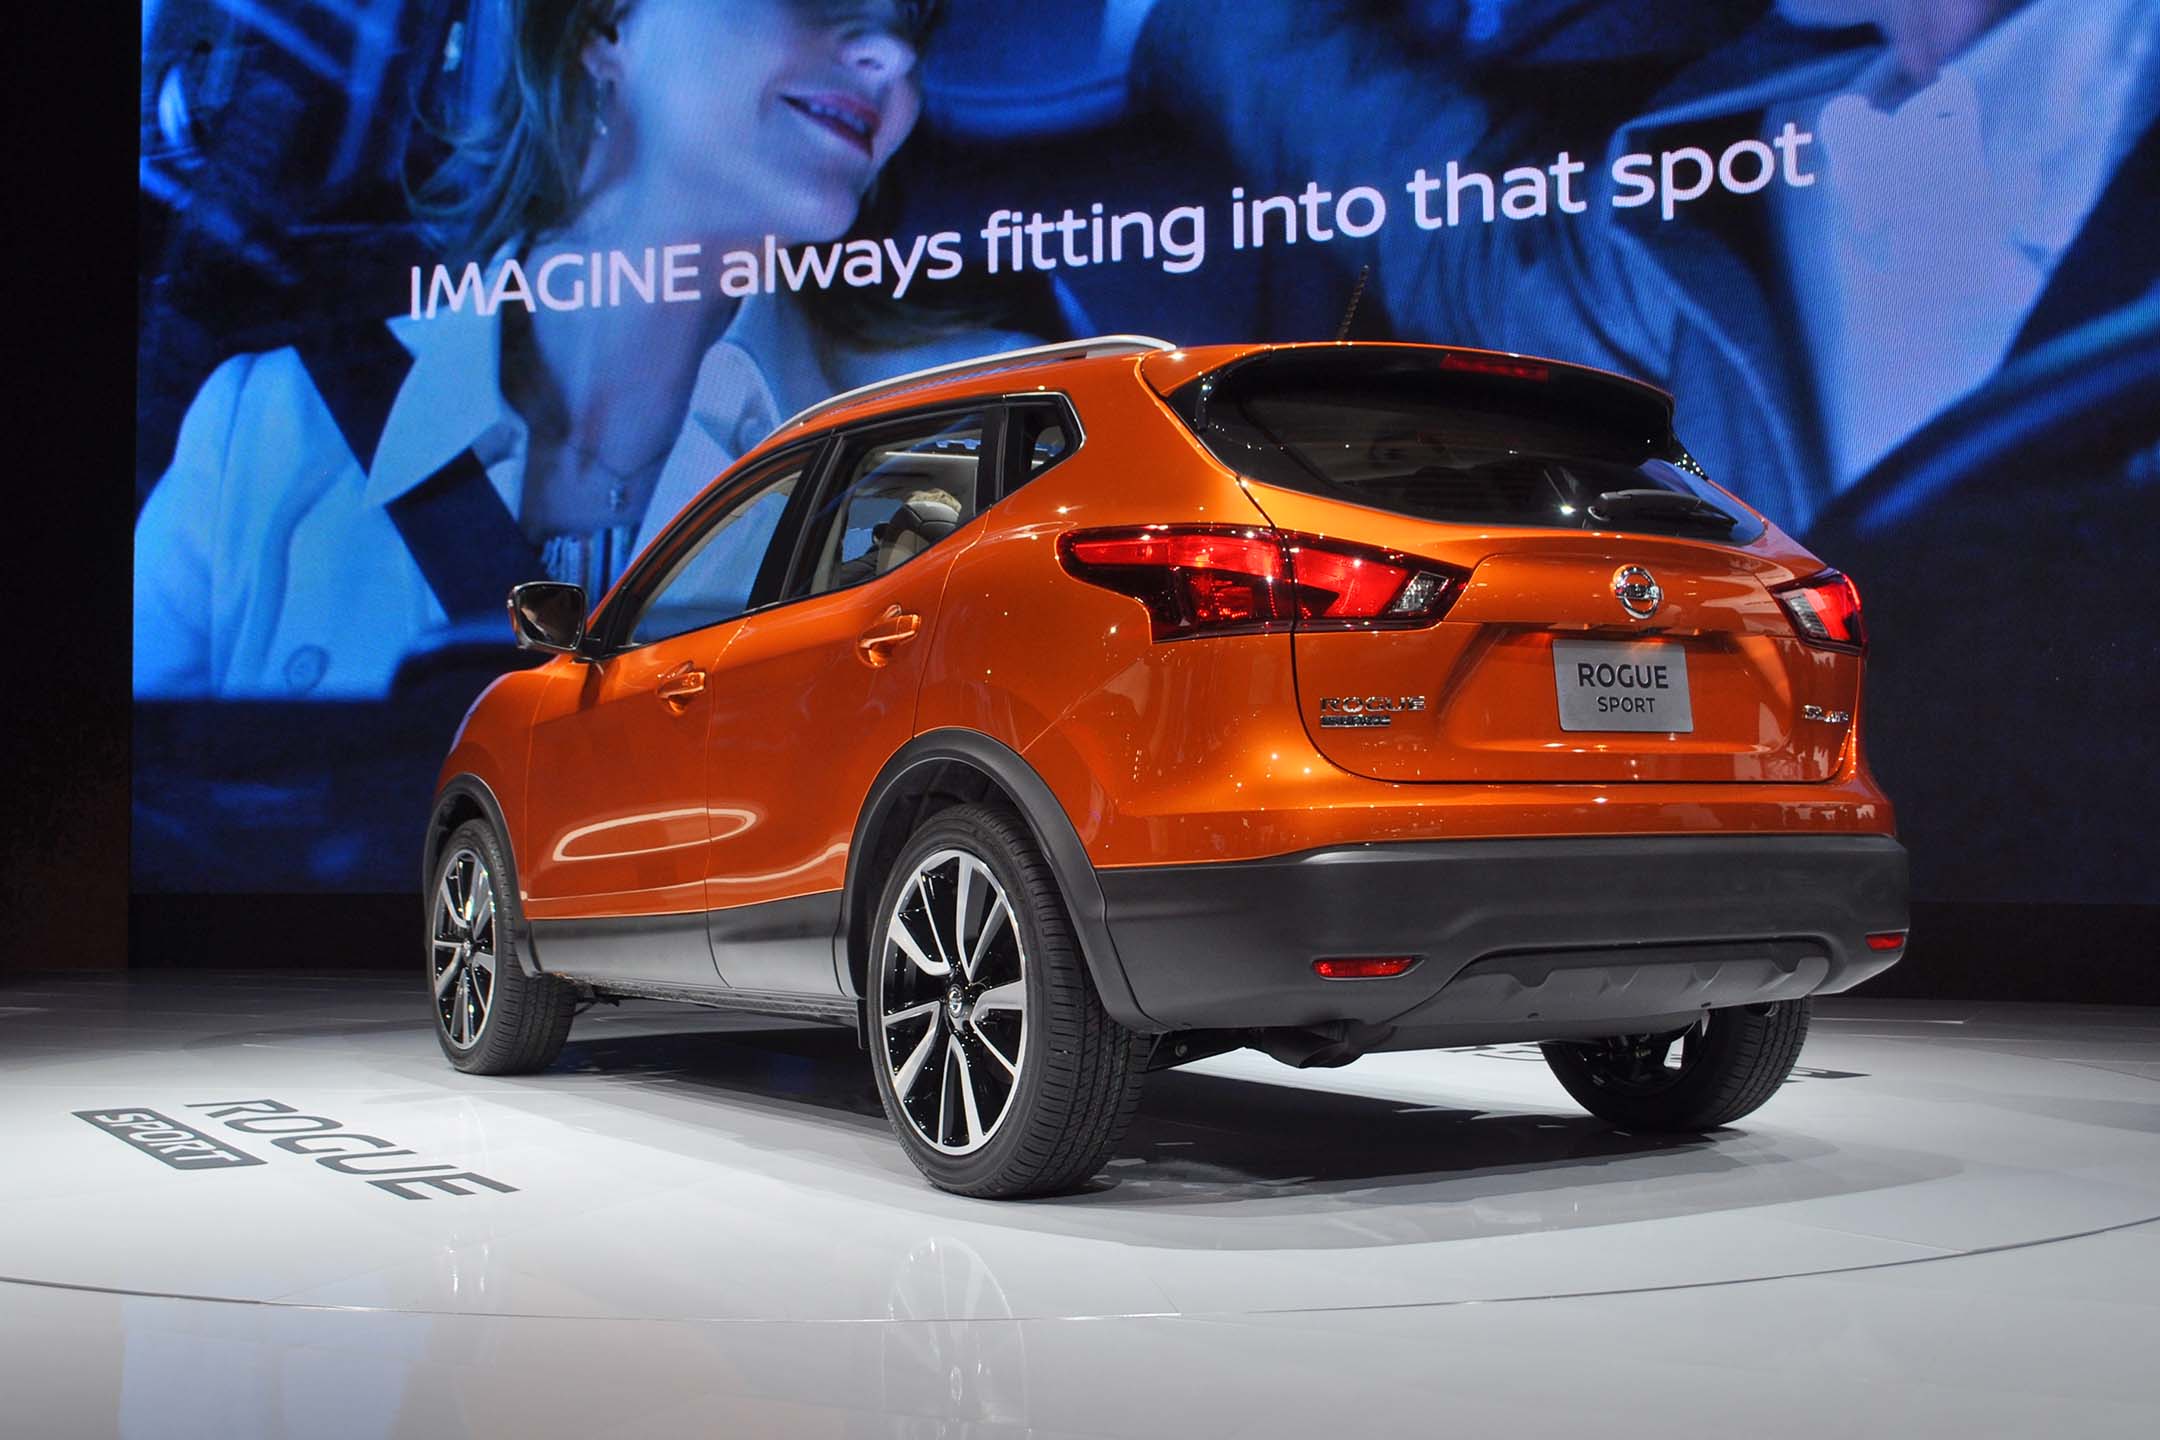 SW: Finally! This is a car that’s been an awfully long time coming: a true subcompact crossover that’s attractive and will be affordable for the masses. Canada is going to love it.